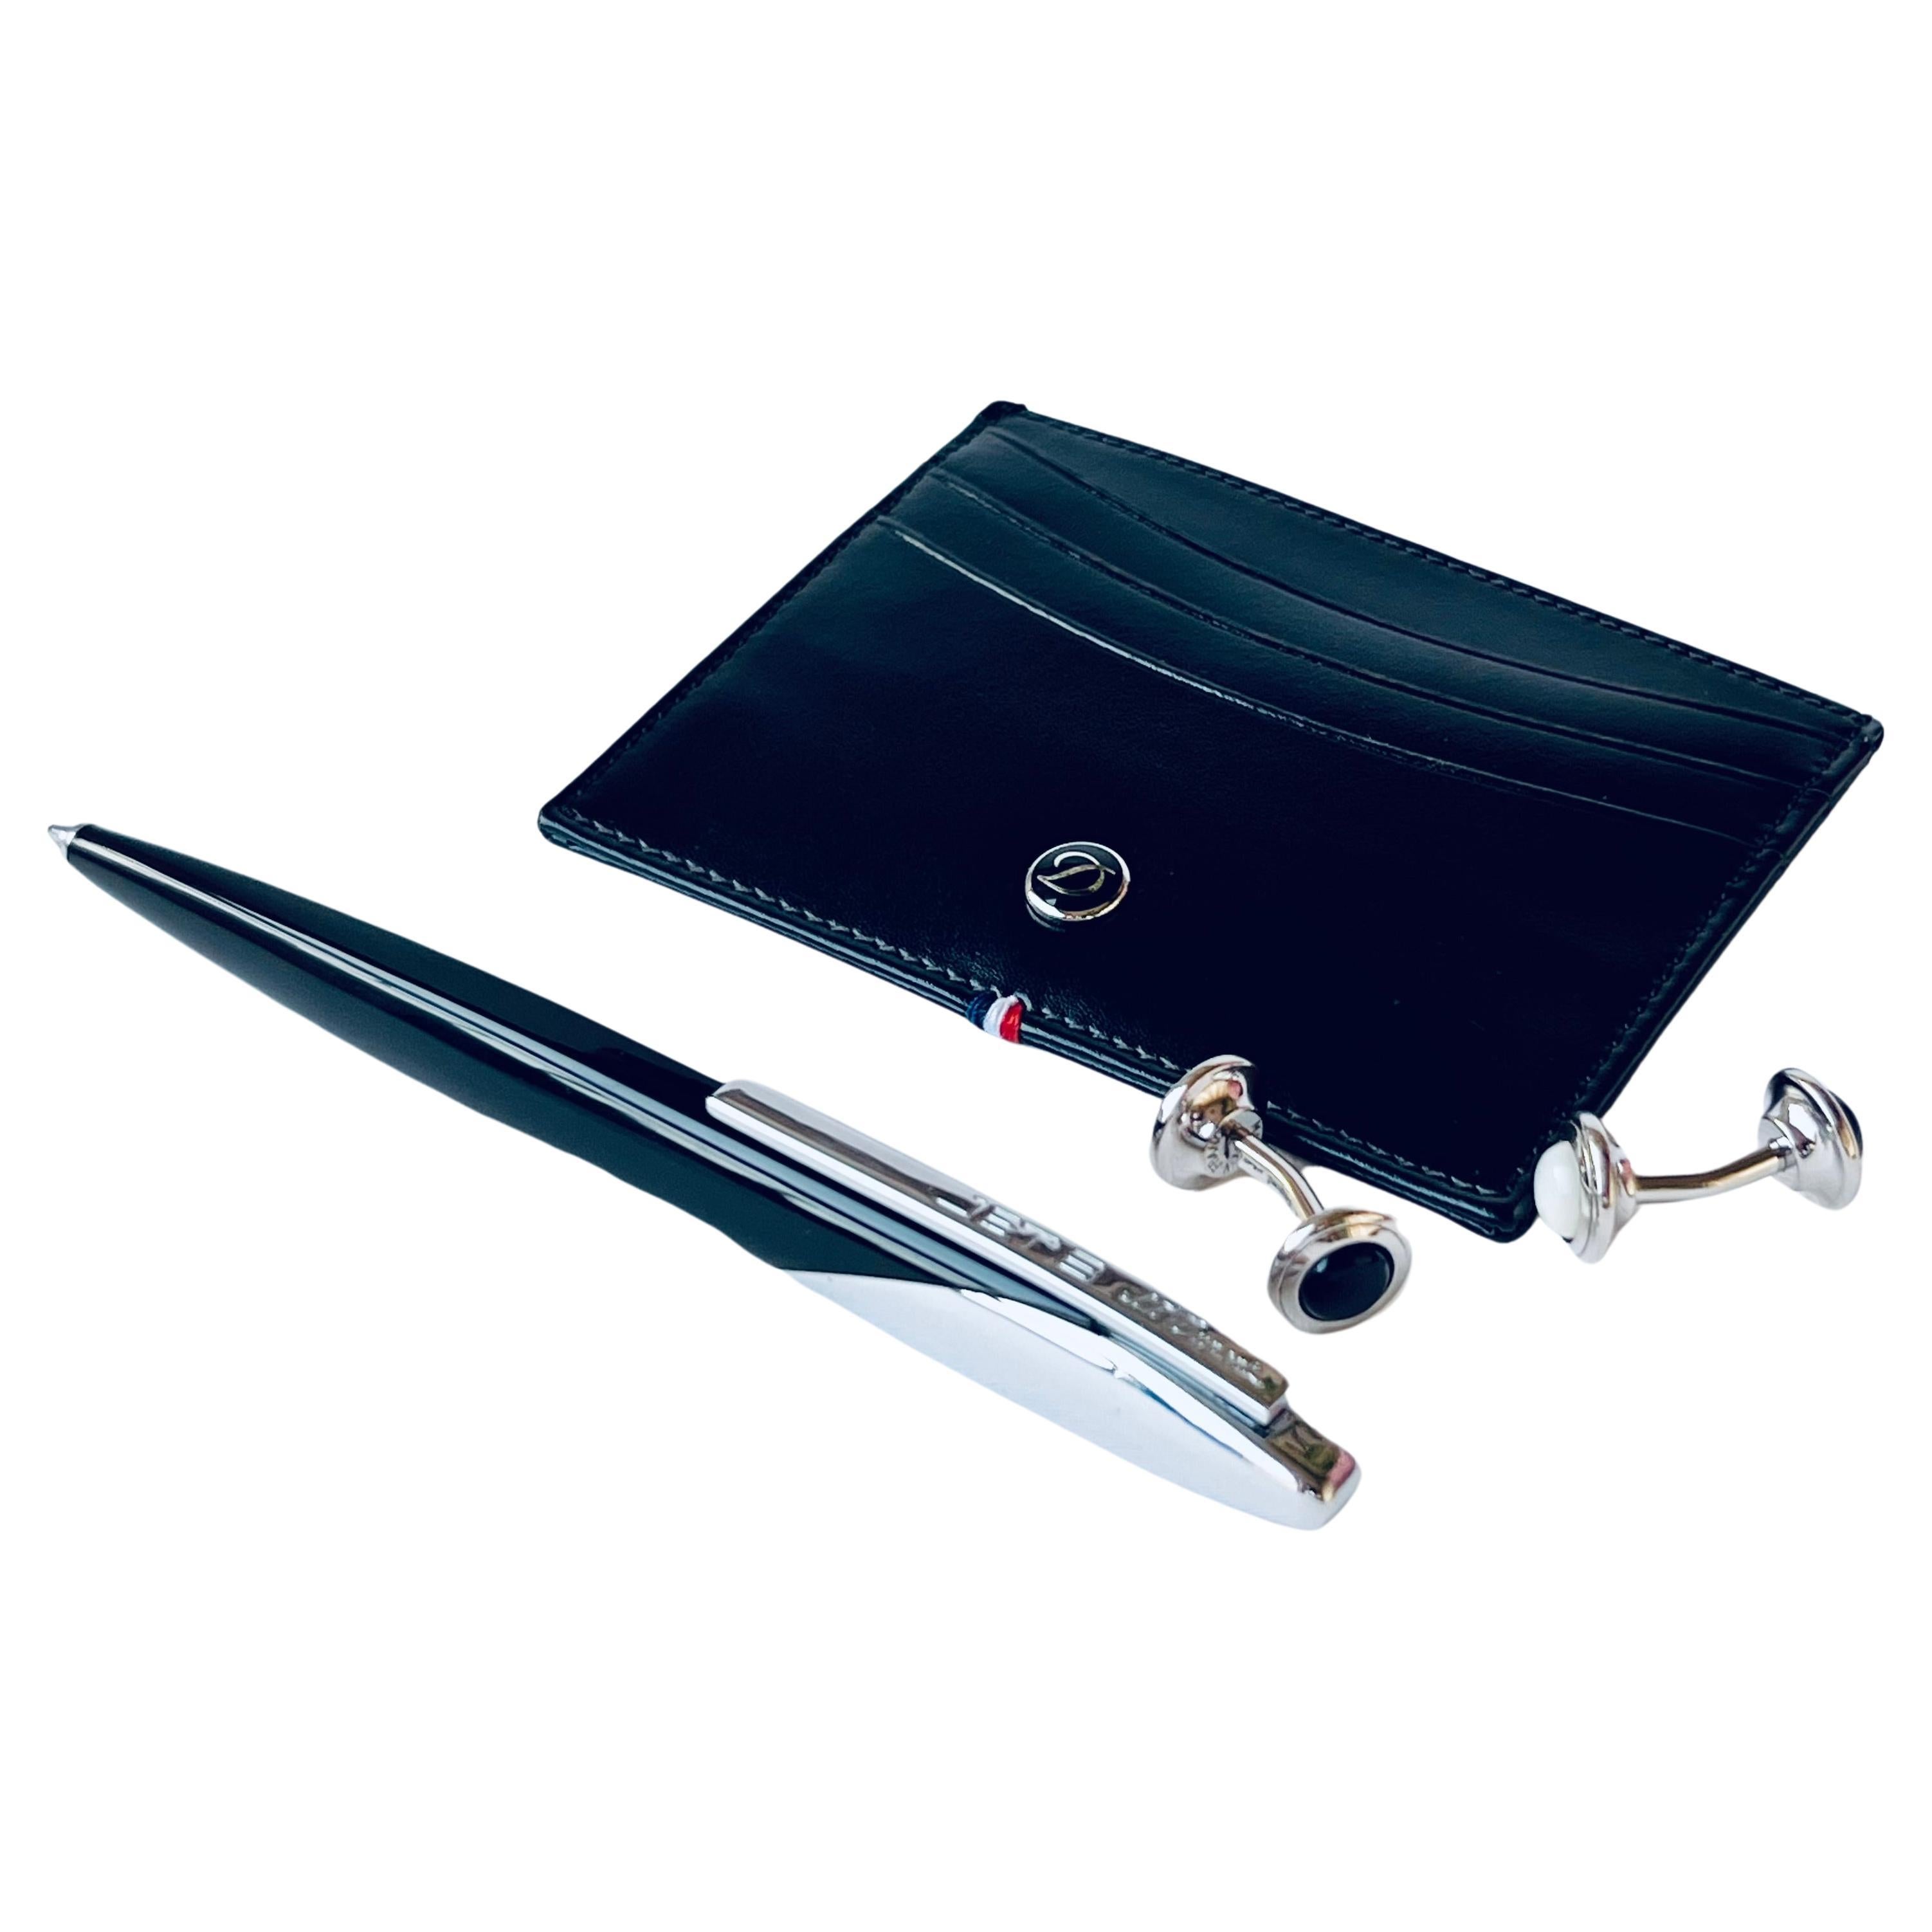 ST Dupont PALLADIUM BLACK Ballpoint And cufflinks & Wallet Cards Holder Set  In Good Condition For Sale In Toronto, CA